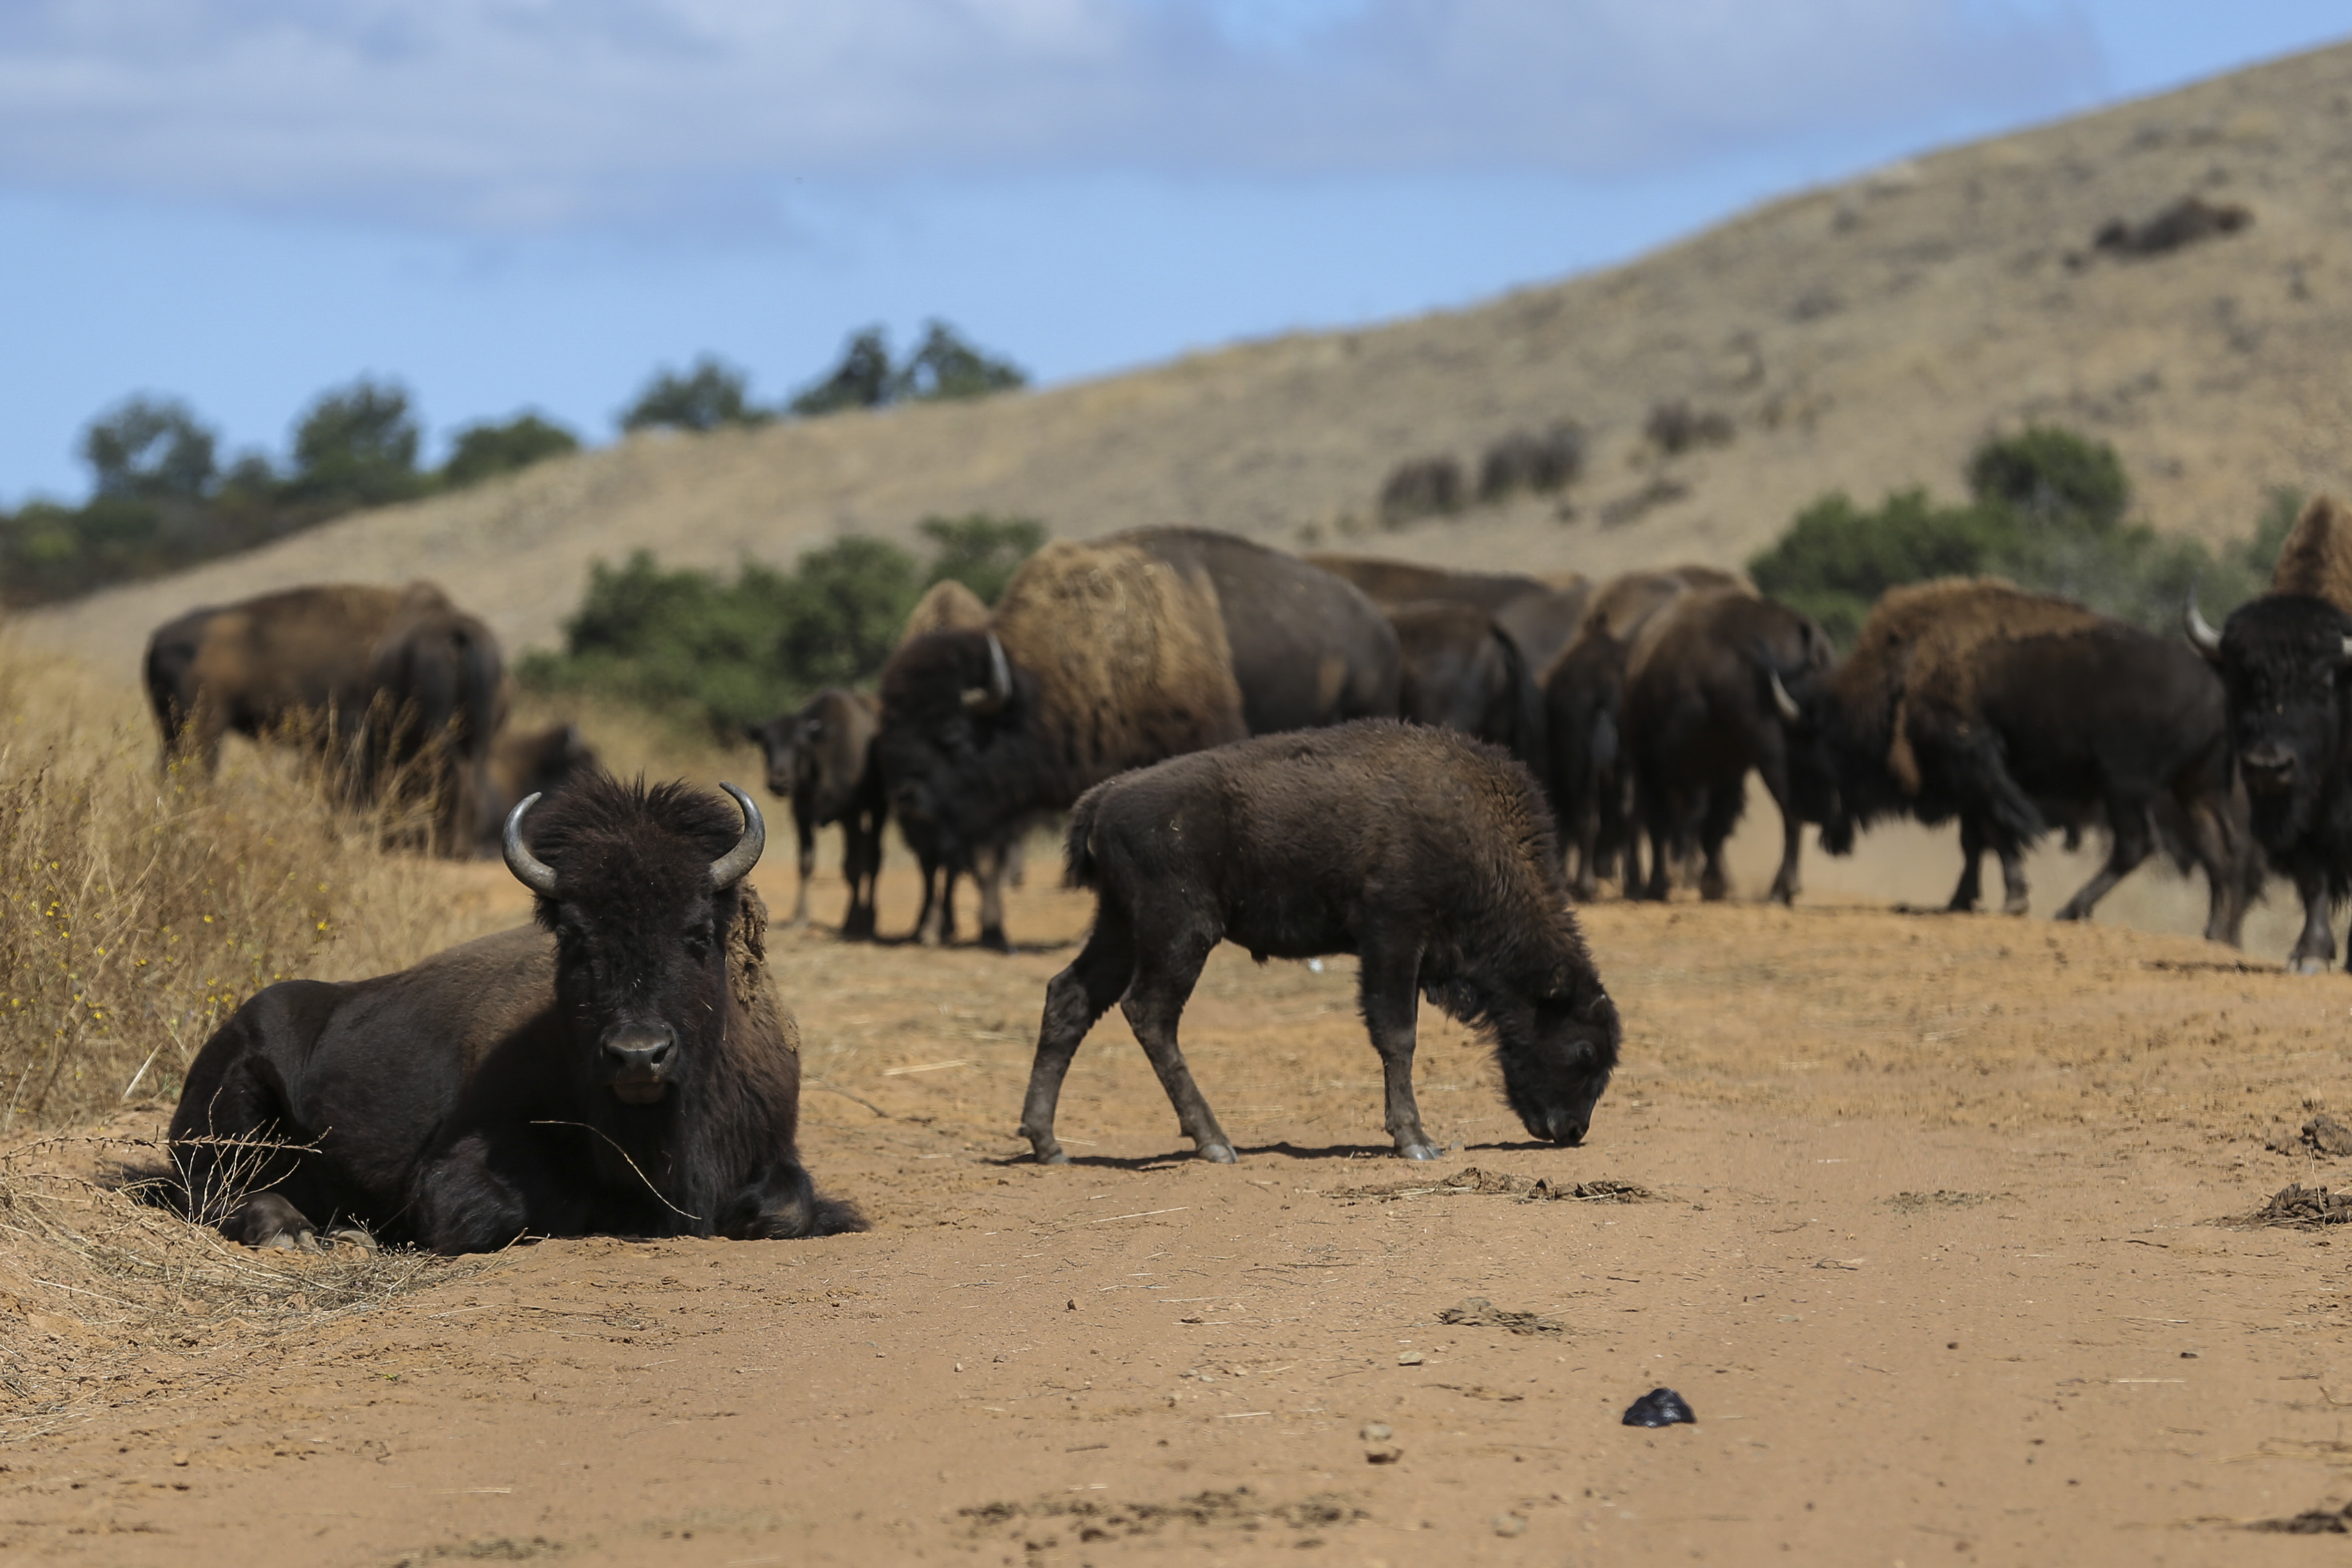 Camp Pendleton is home to Marines, Navy hovercraft and…a herd of bison